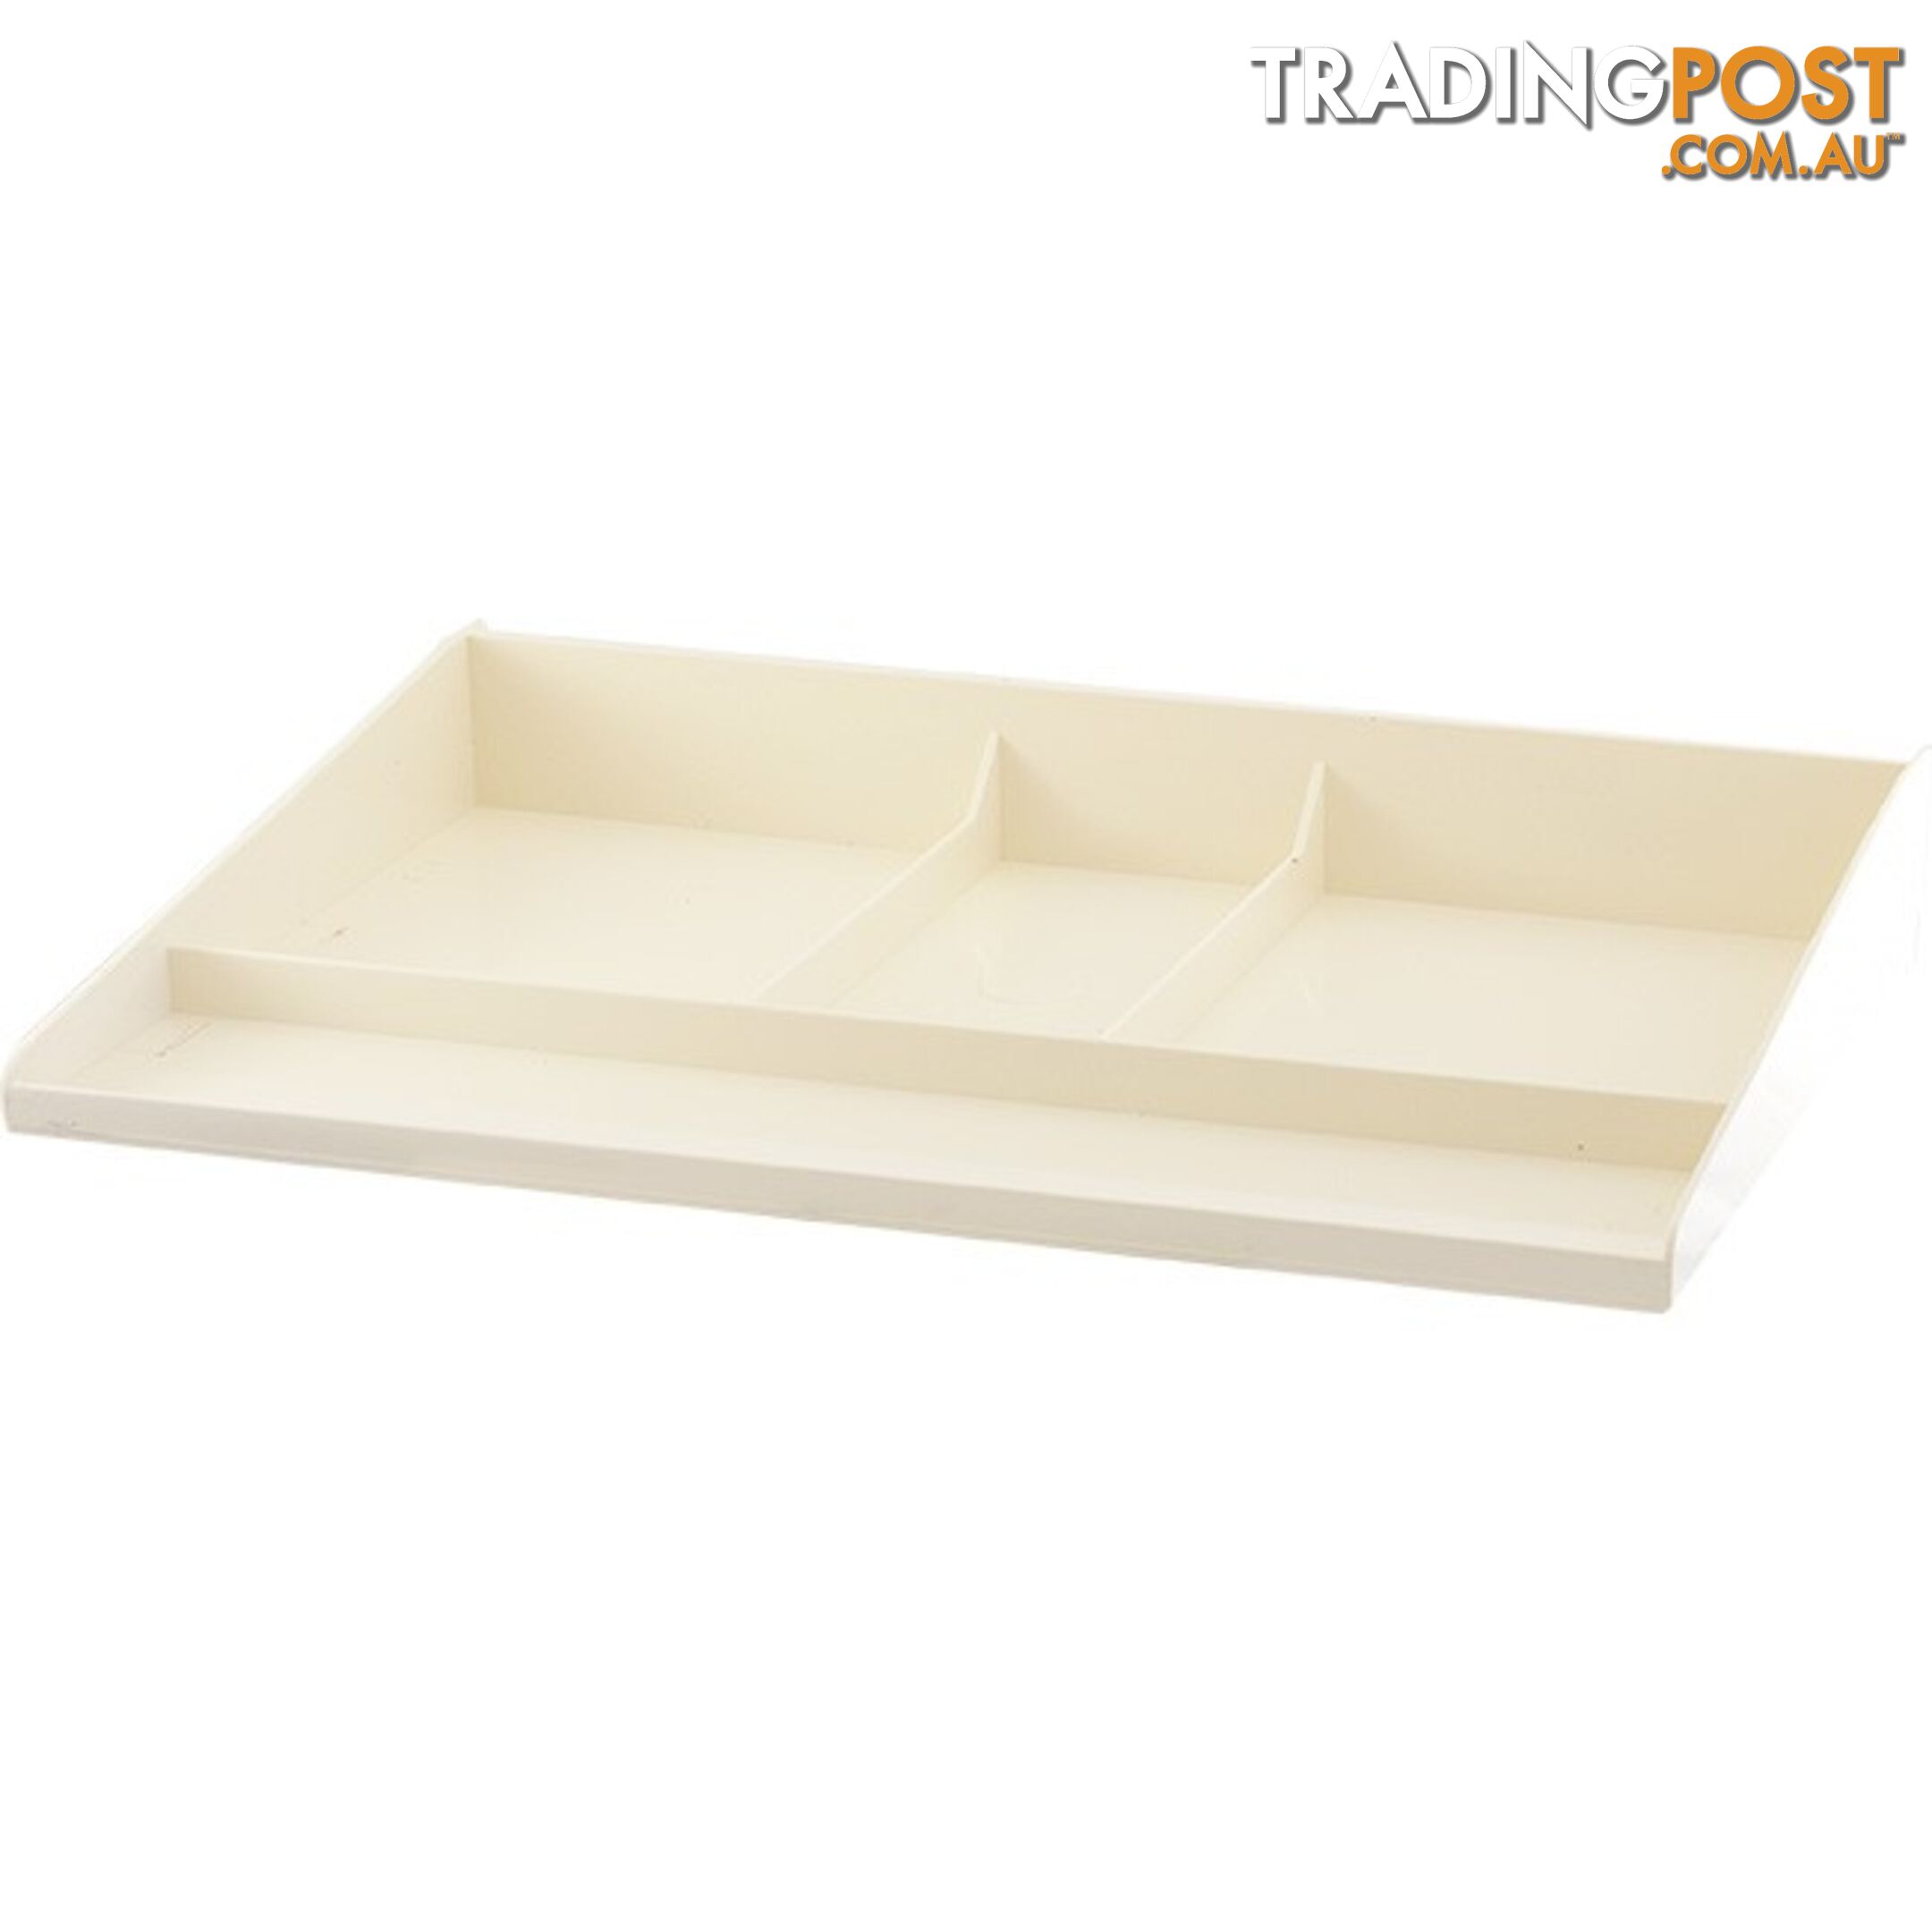 1H081 SHELF TO SUIT LOUVRE PANEL HIGH STRENGTH A.B.S. PLASTIC